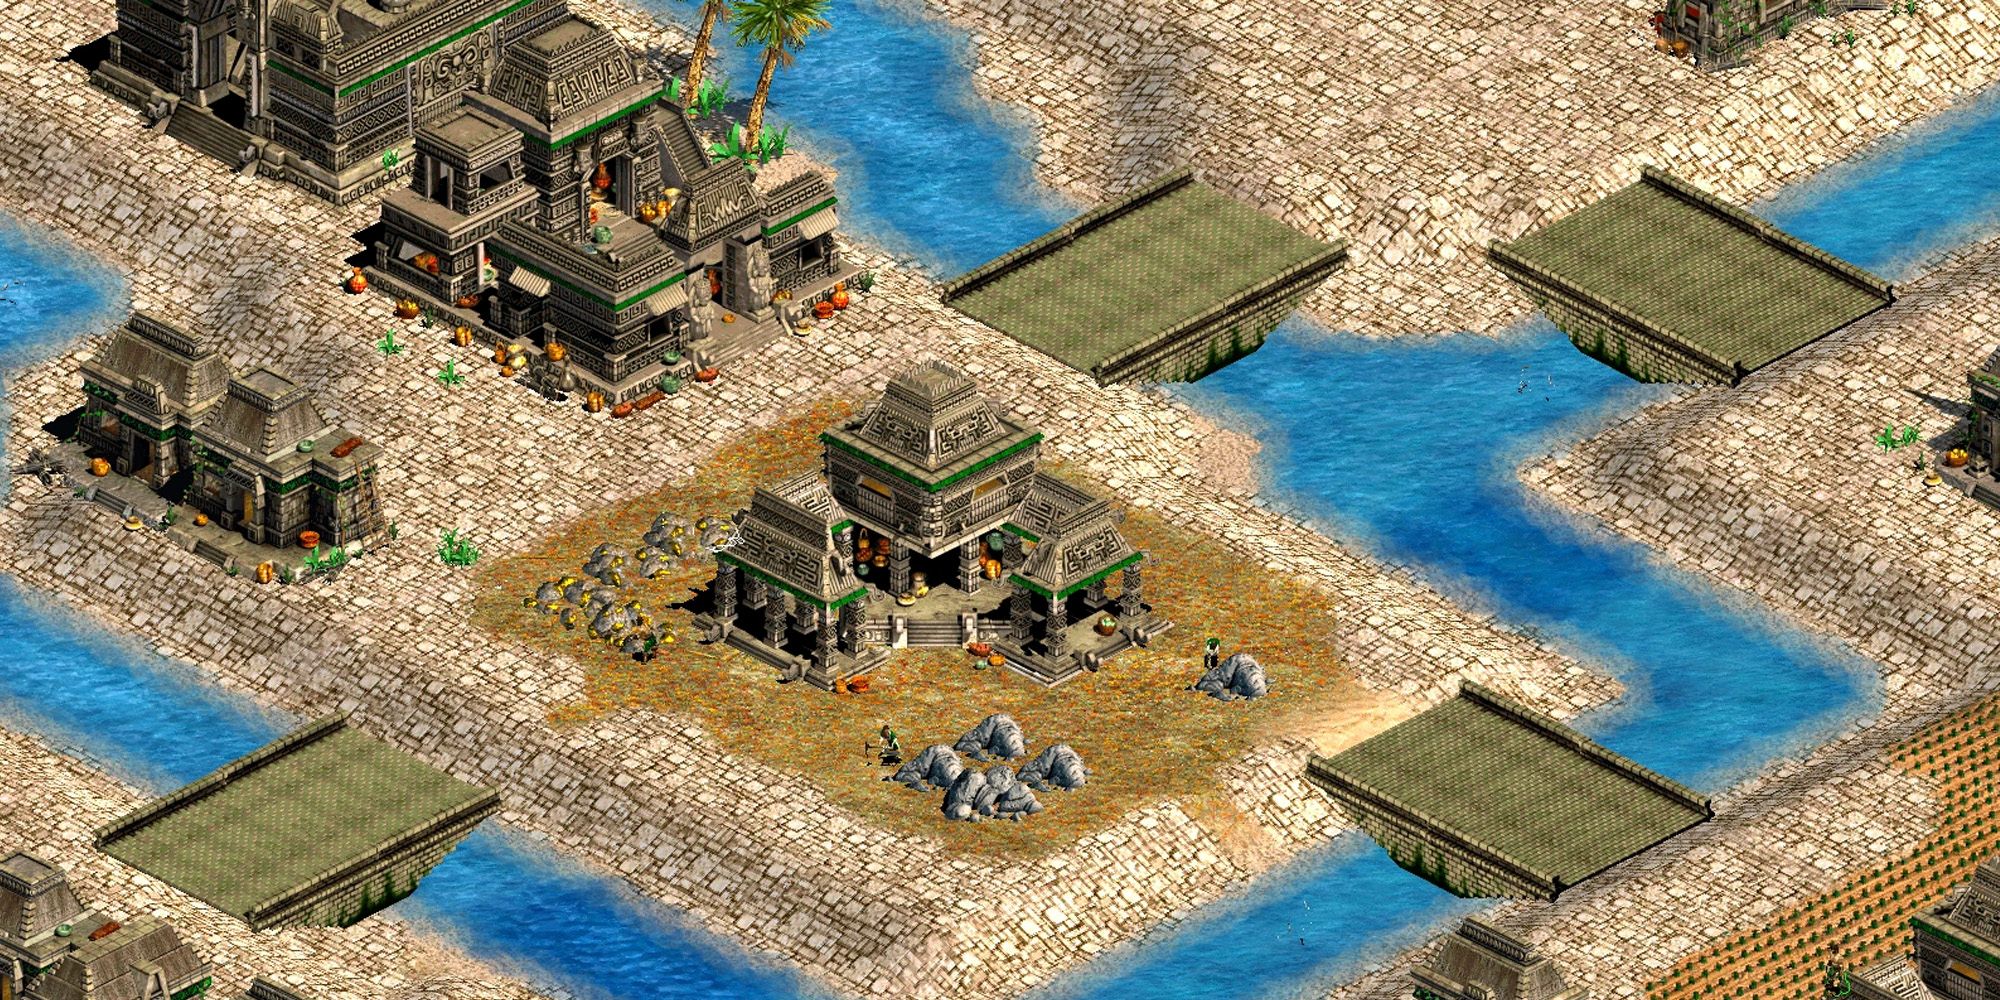 aztec capital tenochtitlan as seen in age of empires 2 campaign